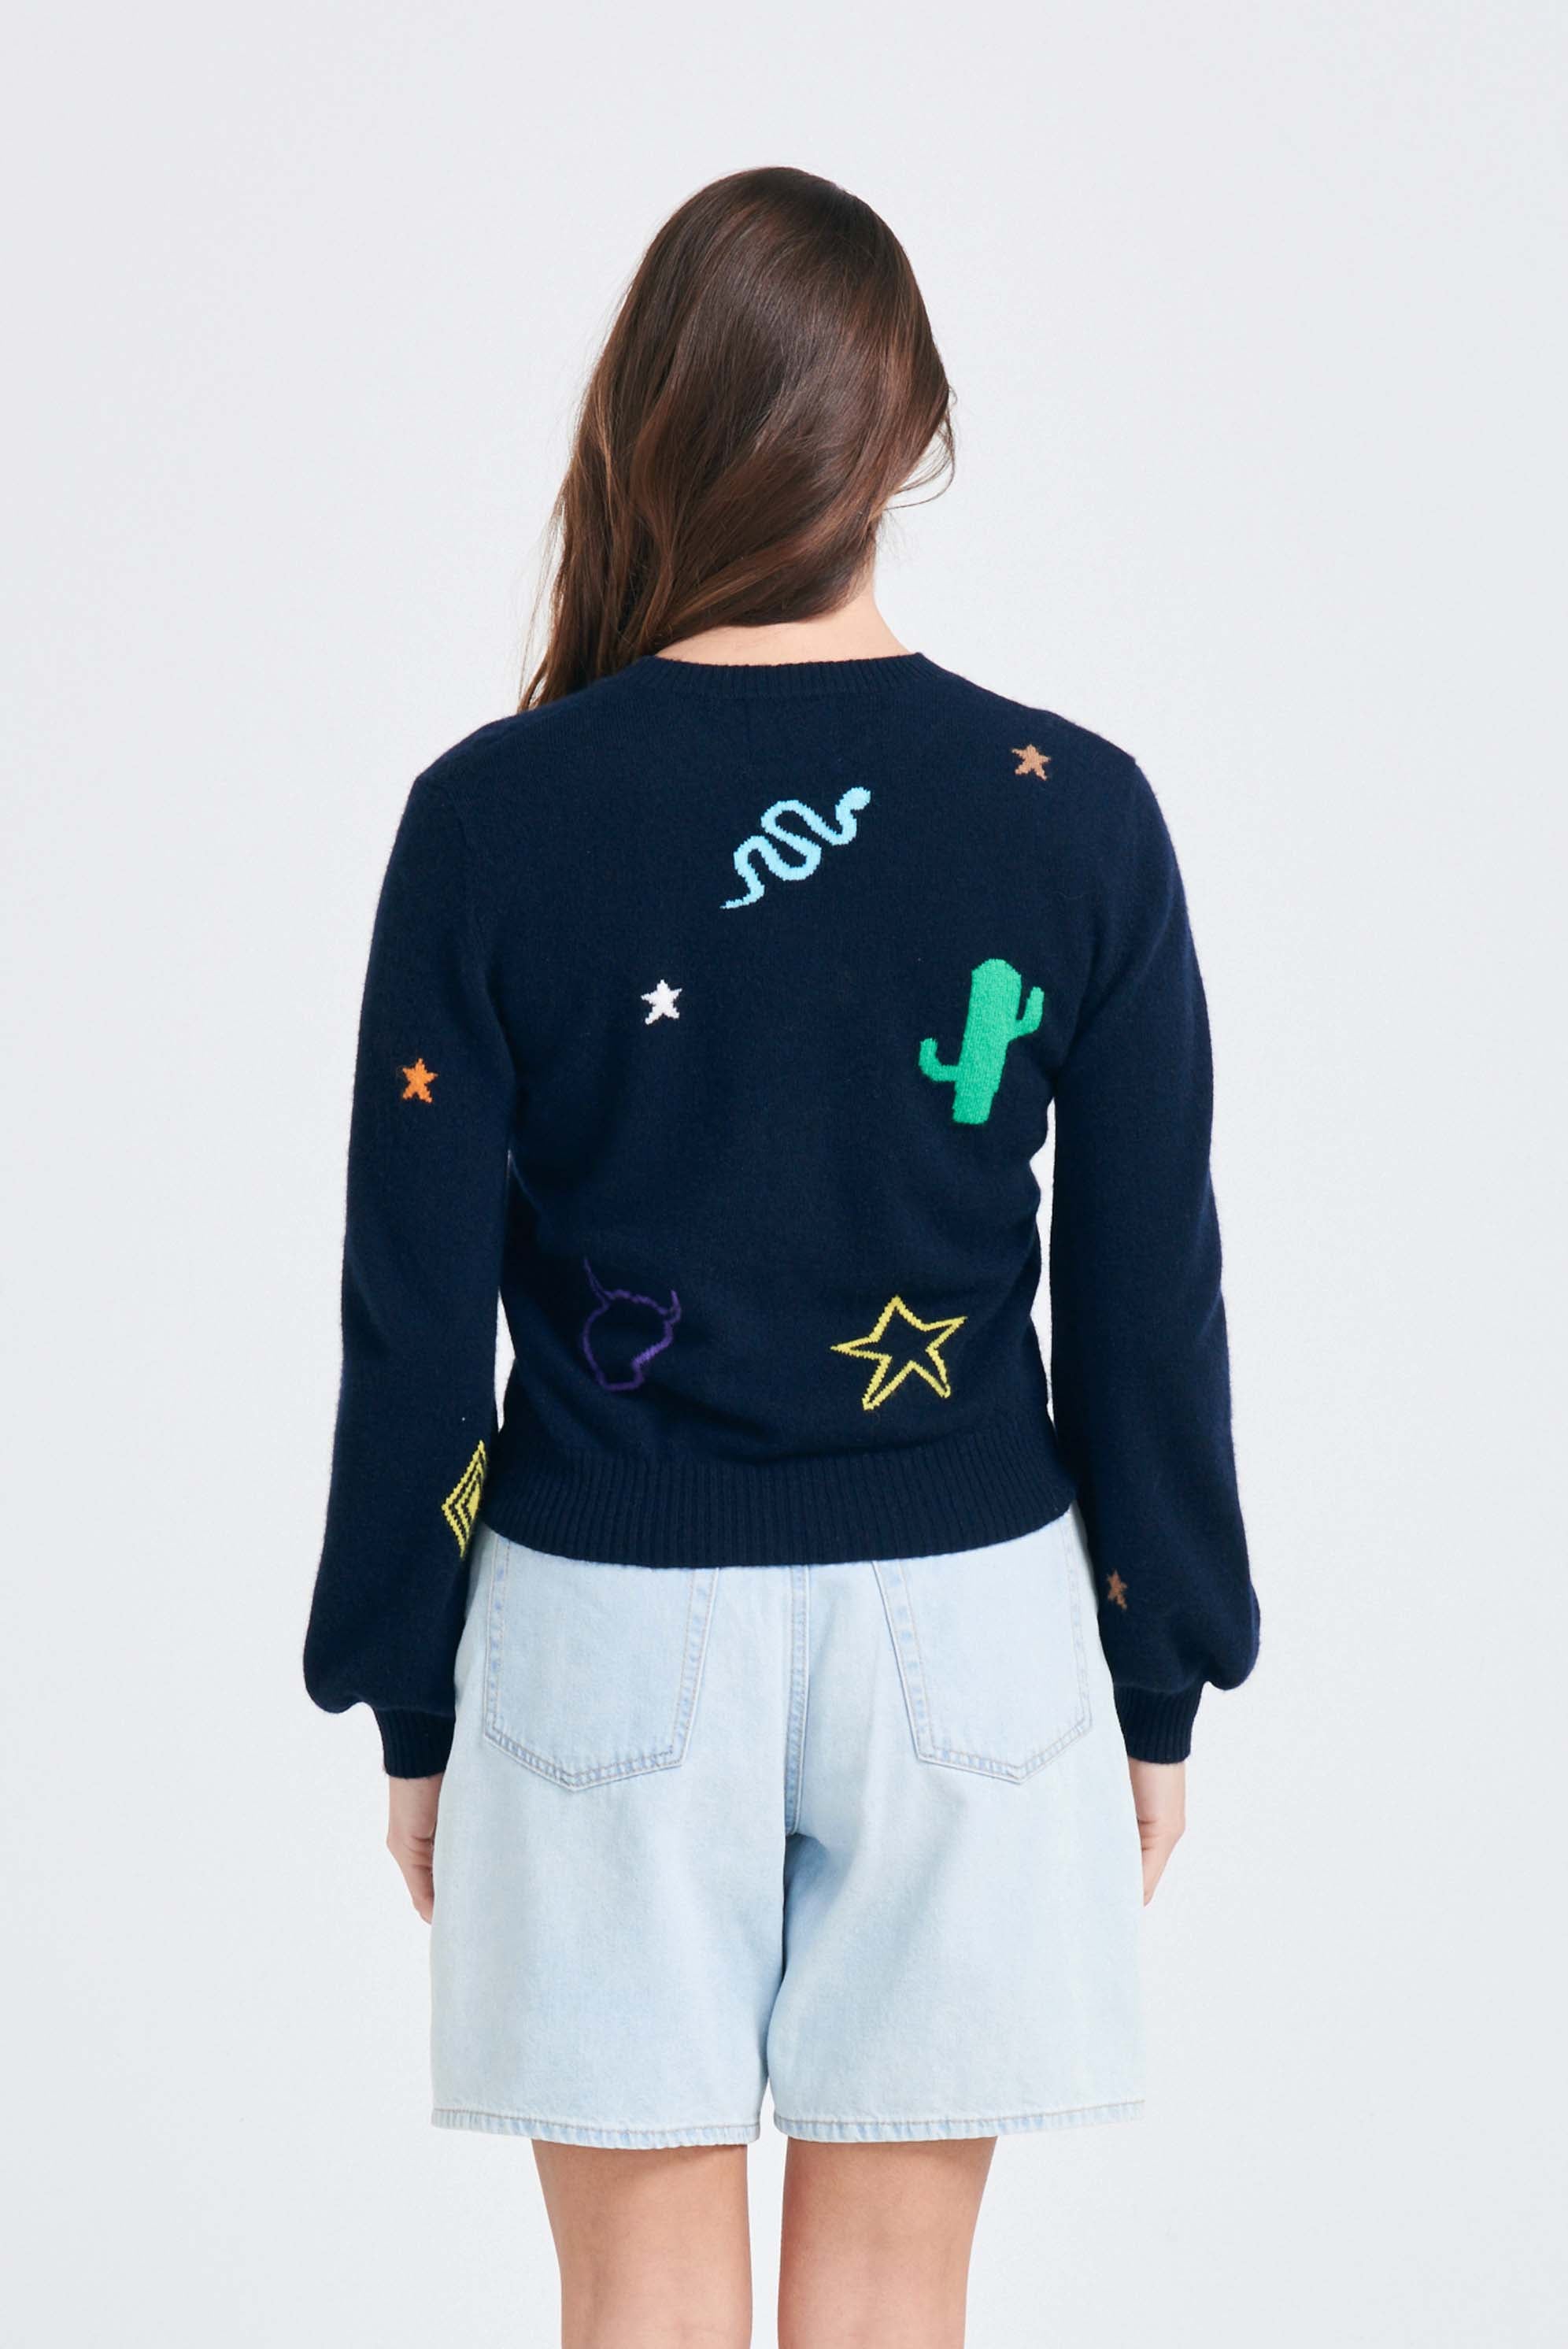 Brown haired female model wearing Jumper1234 Navy cashmere jumper with multi coloured cowboy icons back and front with slightly puff sleeves facing away from the camera